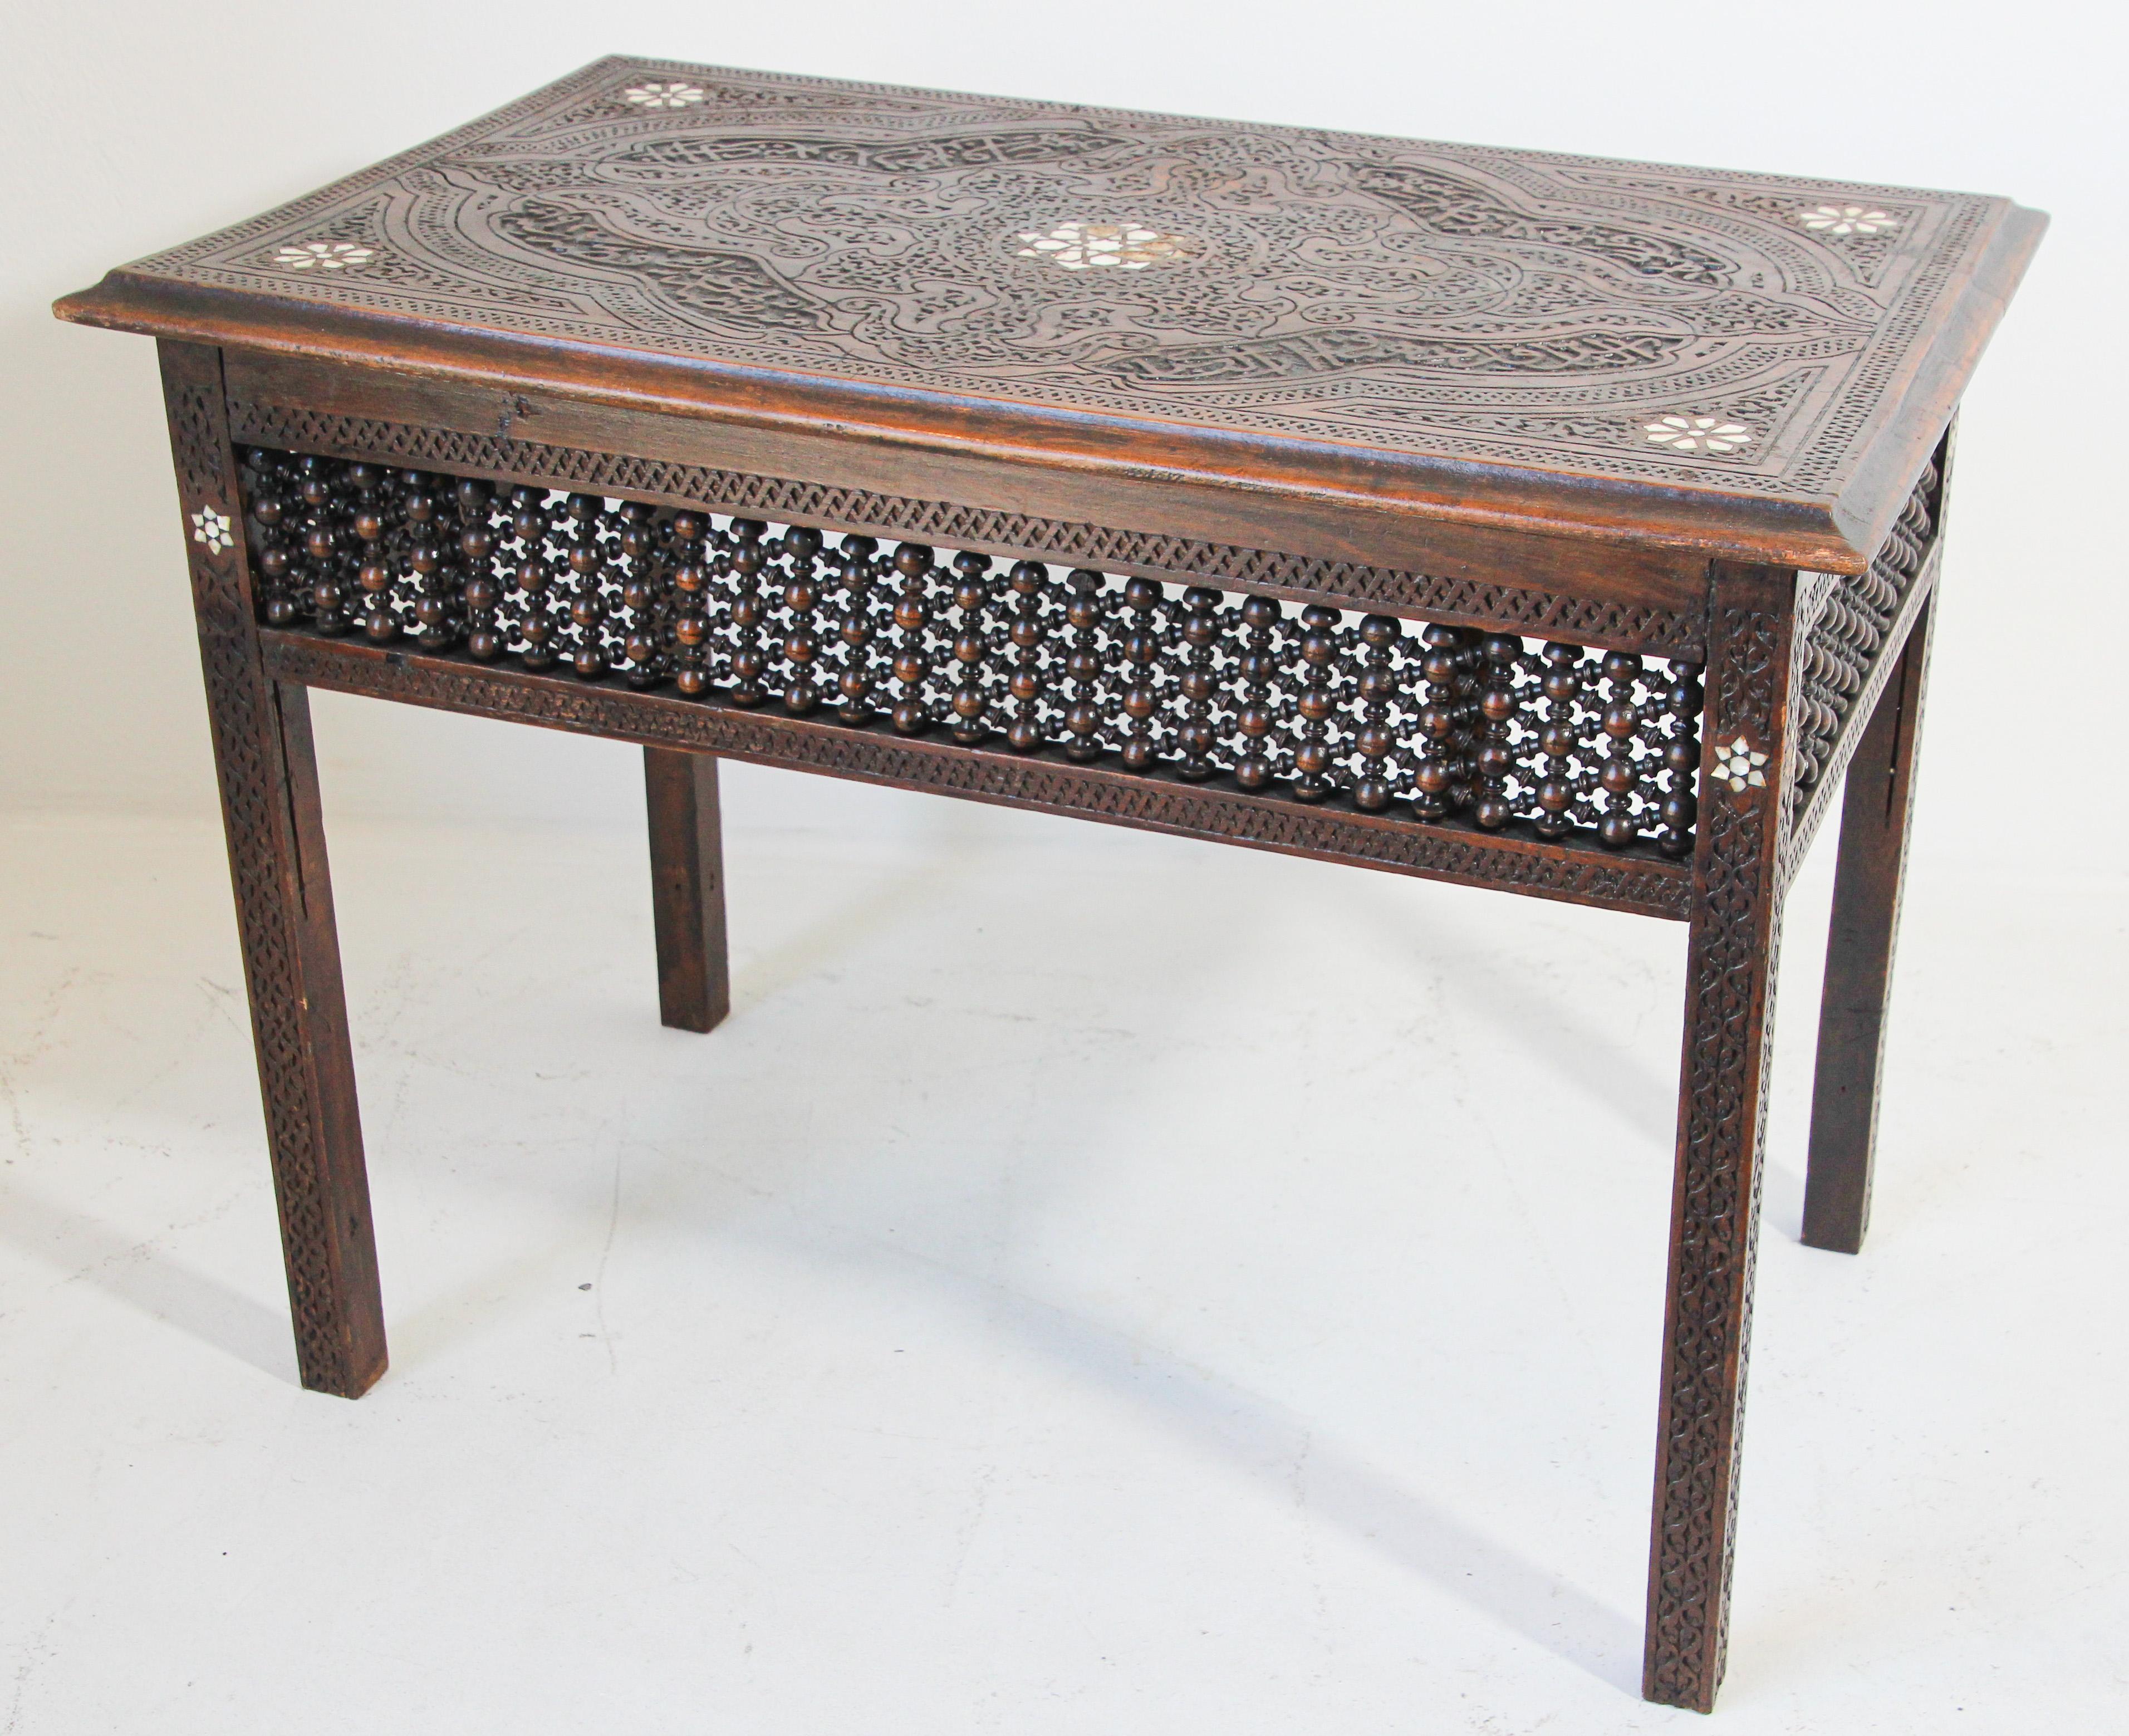 Hand-Carved 19th Century Moorish Tea Table Inlaid with Mother of Pearl